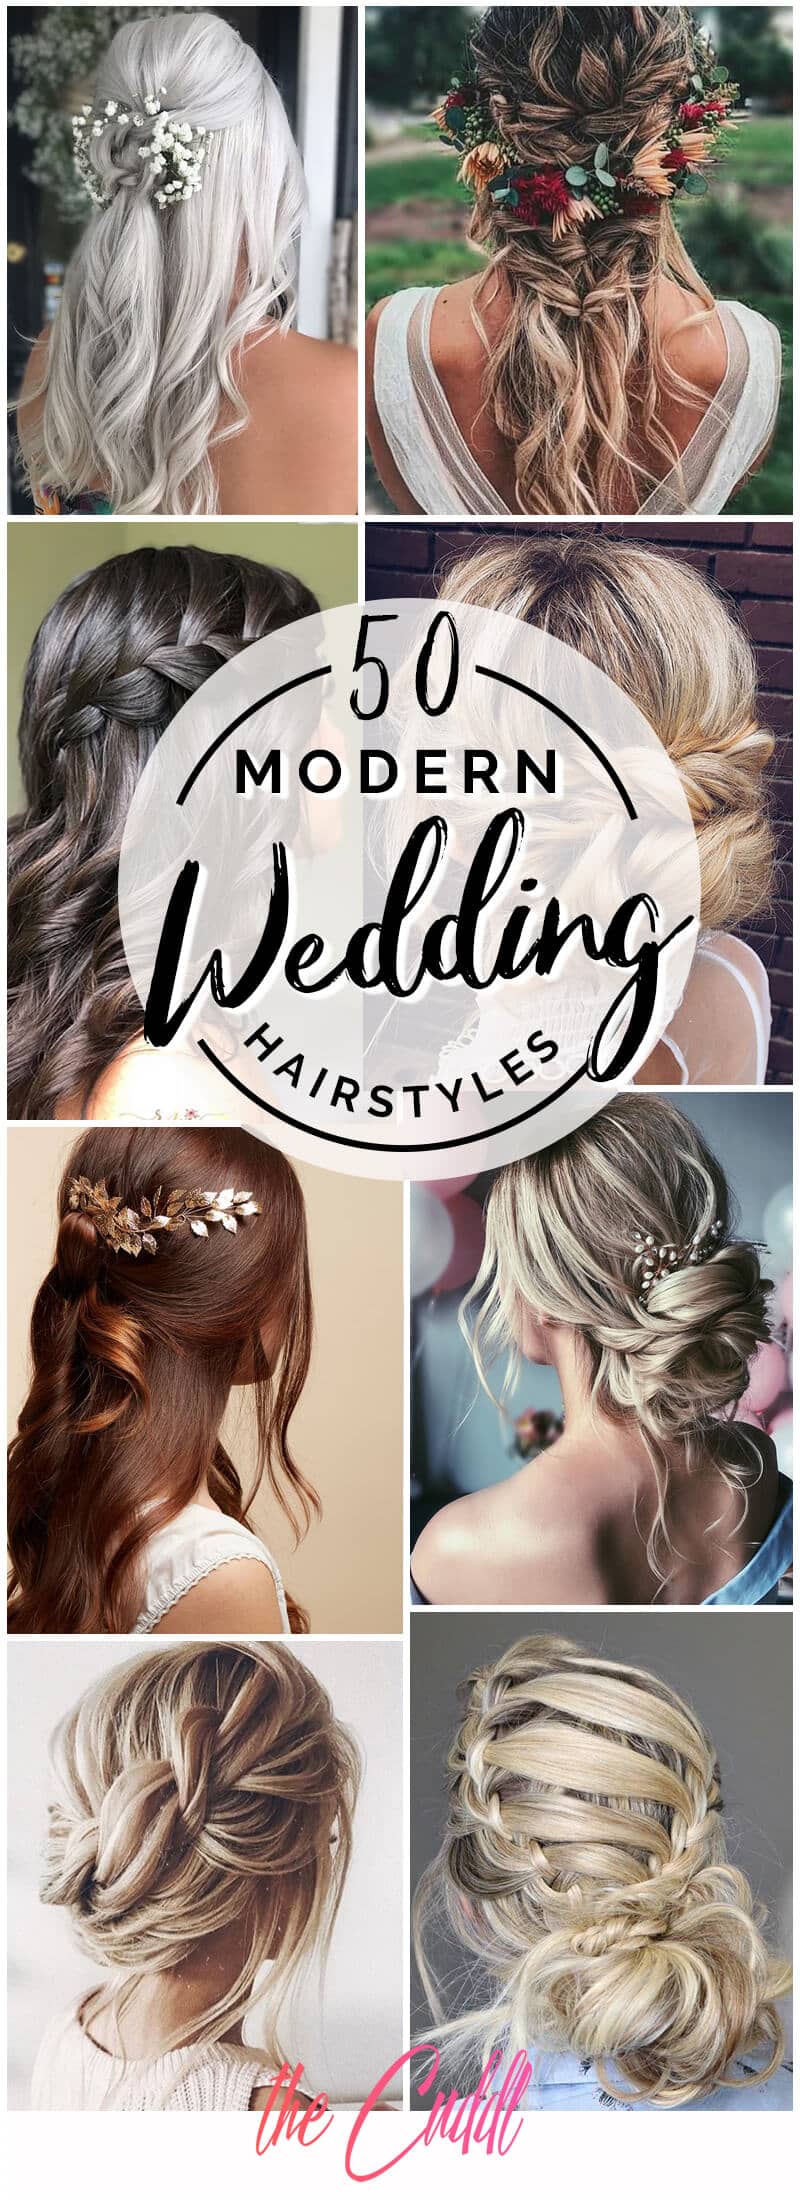 50 Modern Wedding Hairstyle Ideas with Awesome Braids, Curls, and Up-dos